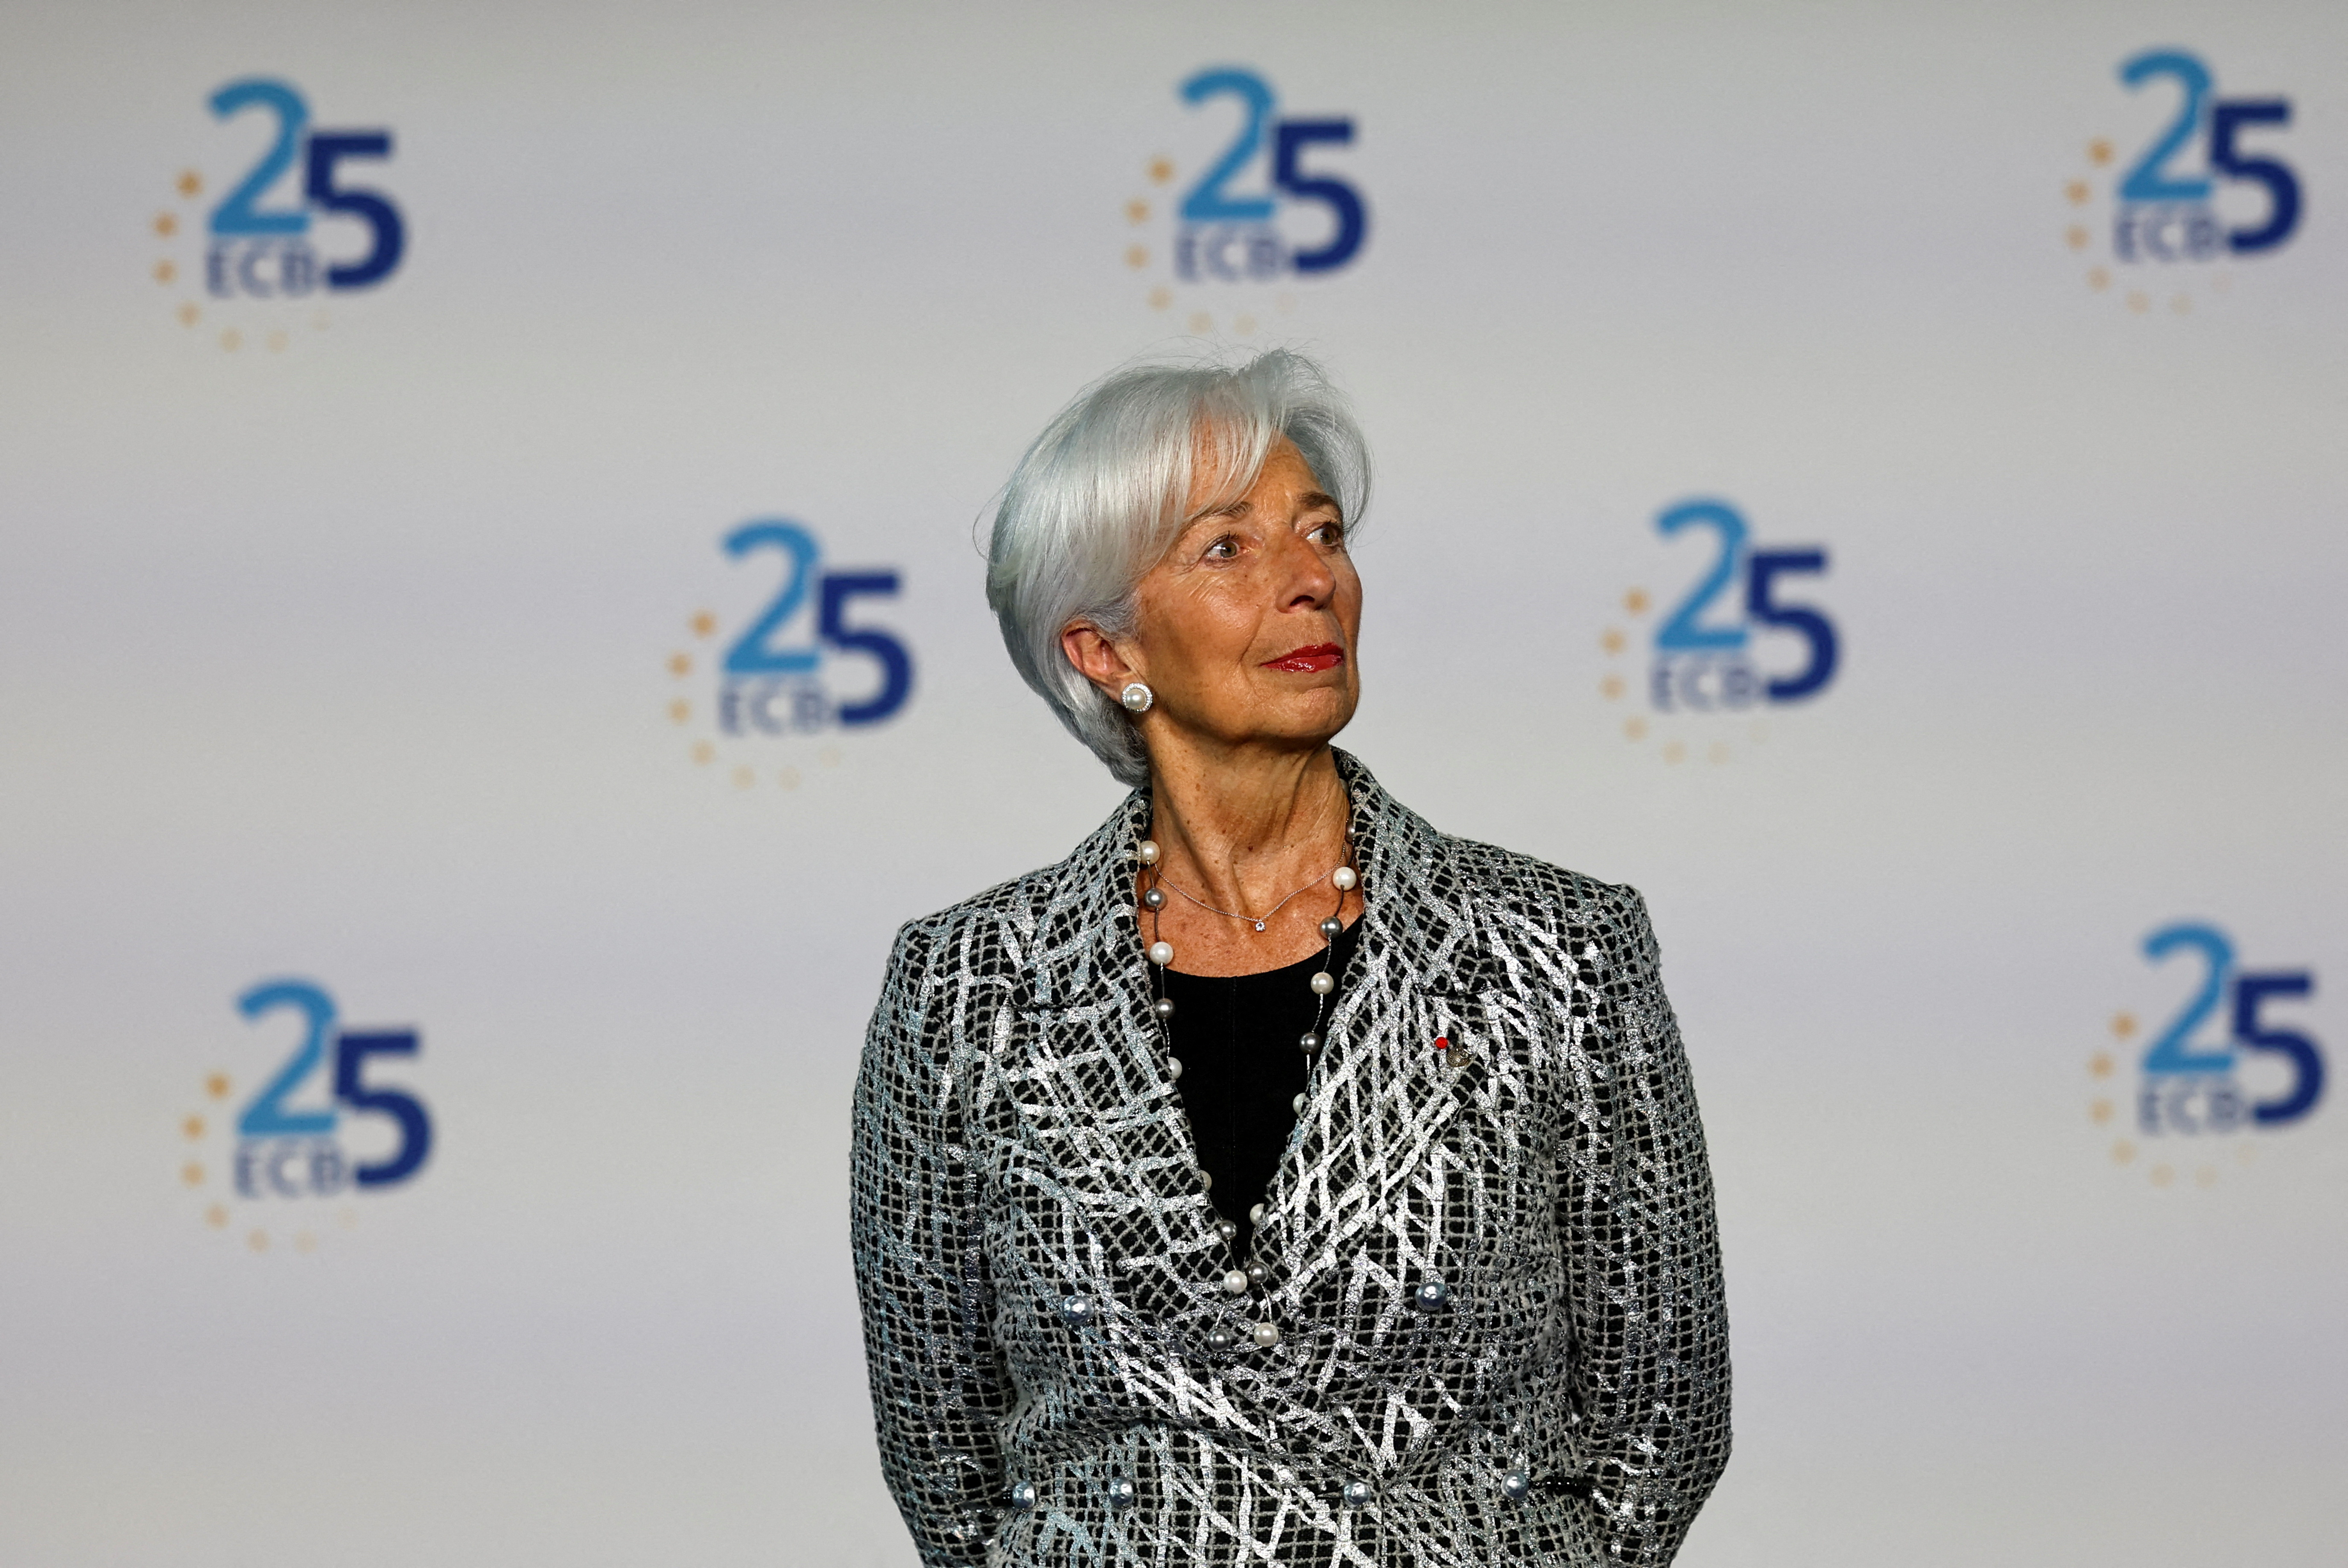 European Central Bank president Christine Lagarde waits to welcome guests during a ceremony to celebrate the 25th anniversary of the ECB, in Frankfurt, Germany, May 24, 2023. REUTERS/Kai Pfaffenbach /Pool